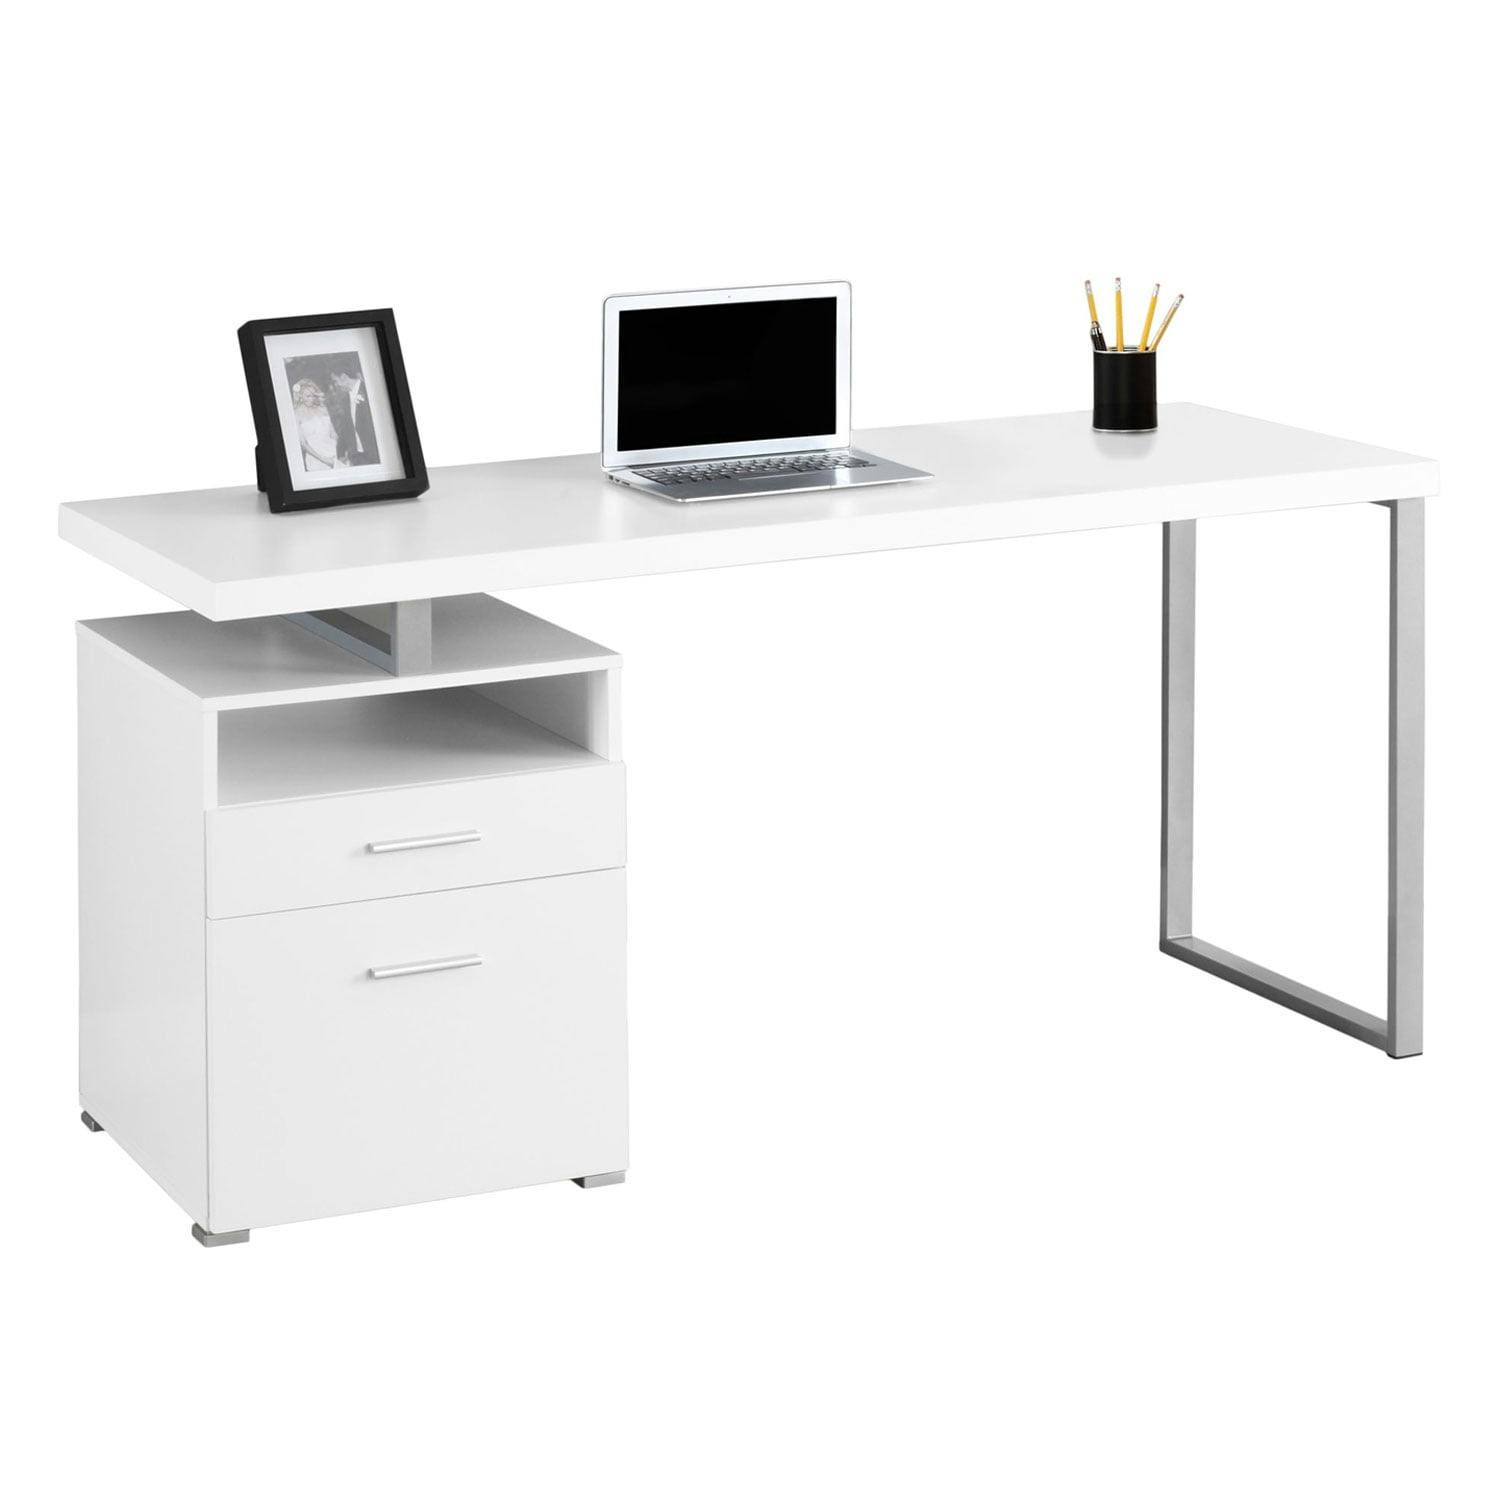 Contemporary White 60" Wood Corner Desk with Filing Drawer